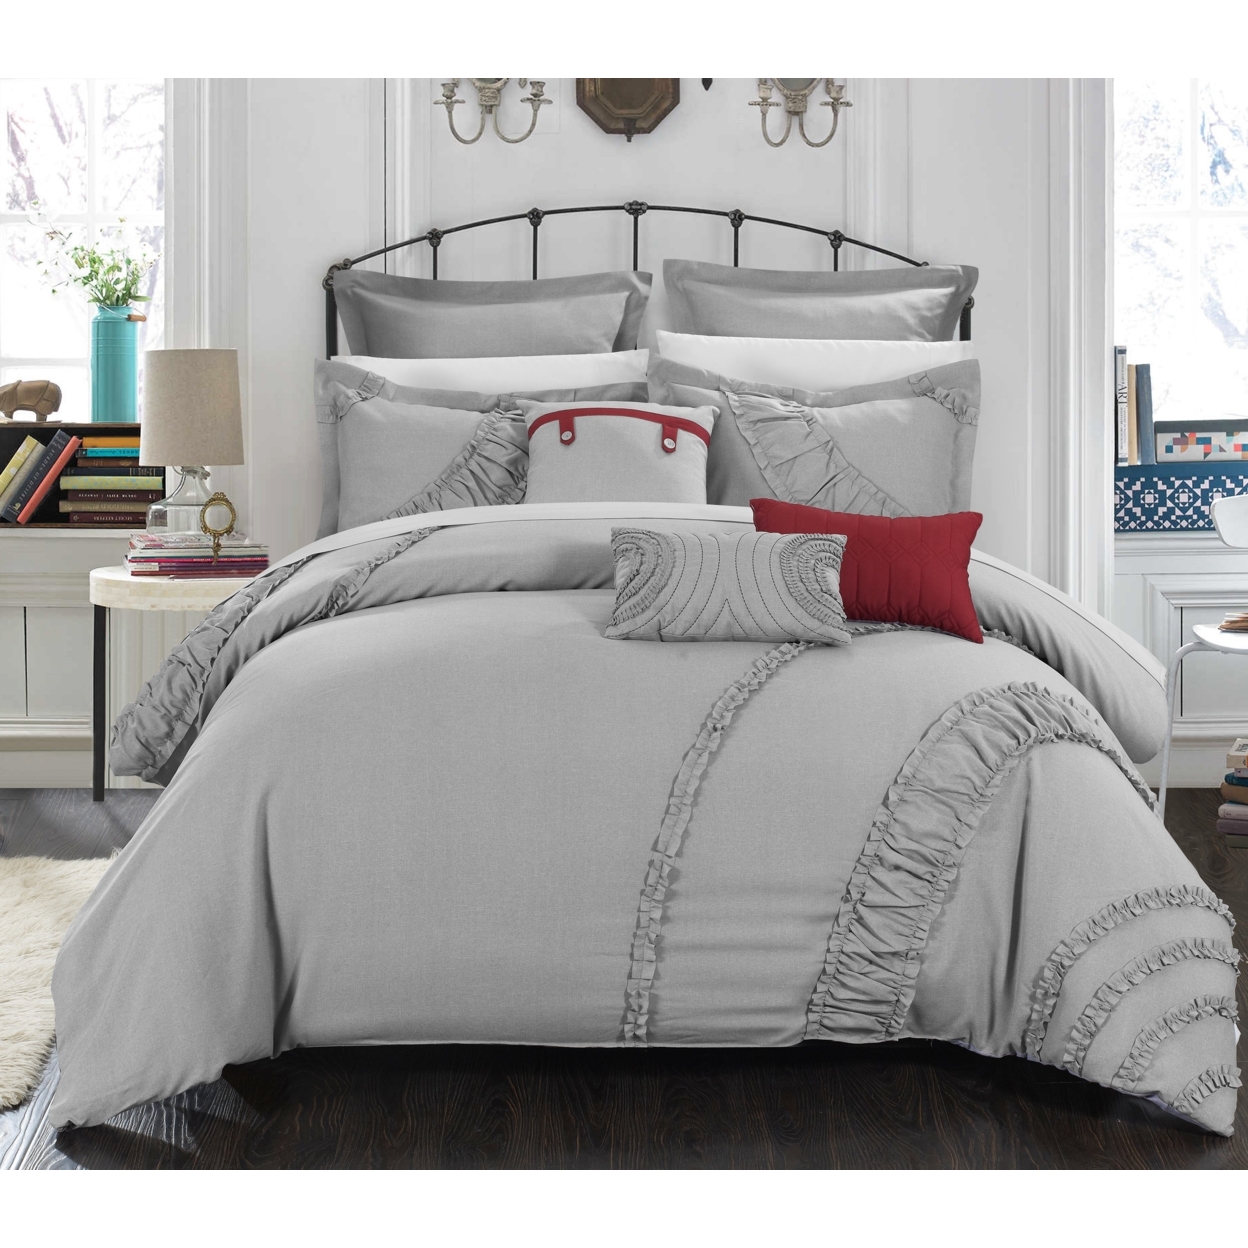 Chic Home 8 Piece Lucerne NEW FAUX LINEN FABRIC COLLECTION OVERSIZED AND OVERFILLED Embroidered Comforter Set - Silver, Queen